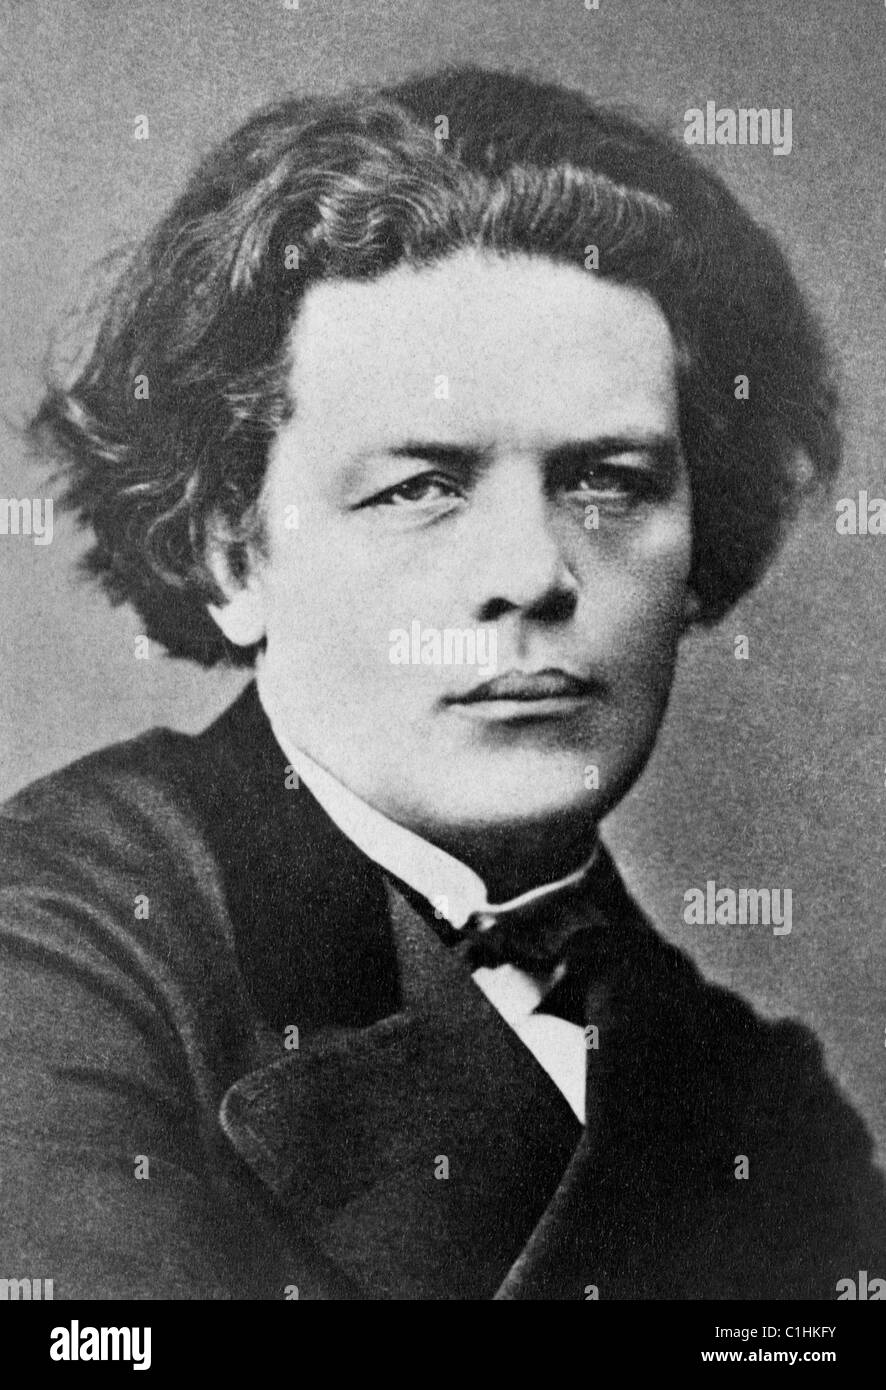 Vintage portrait photo of Russian pianist, composer and conductor Anton Rubinstein (1829 – 1894). Photo circa 1870. Stock Photo